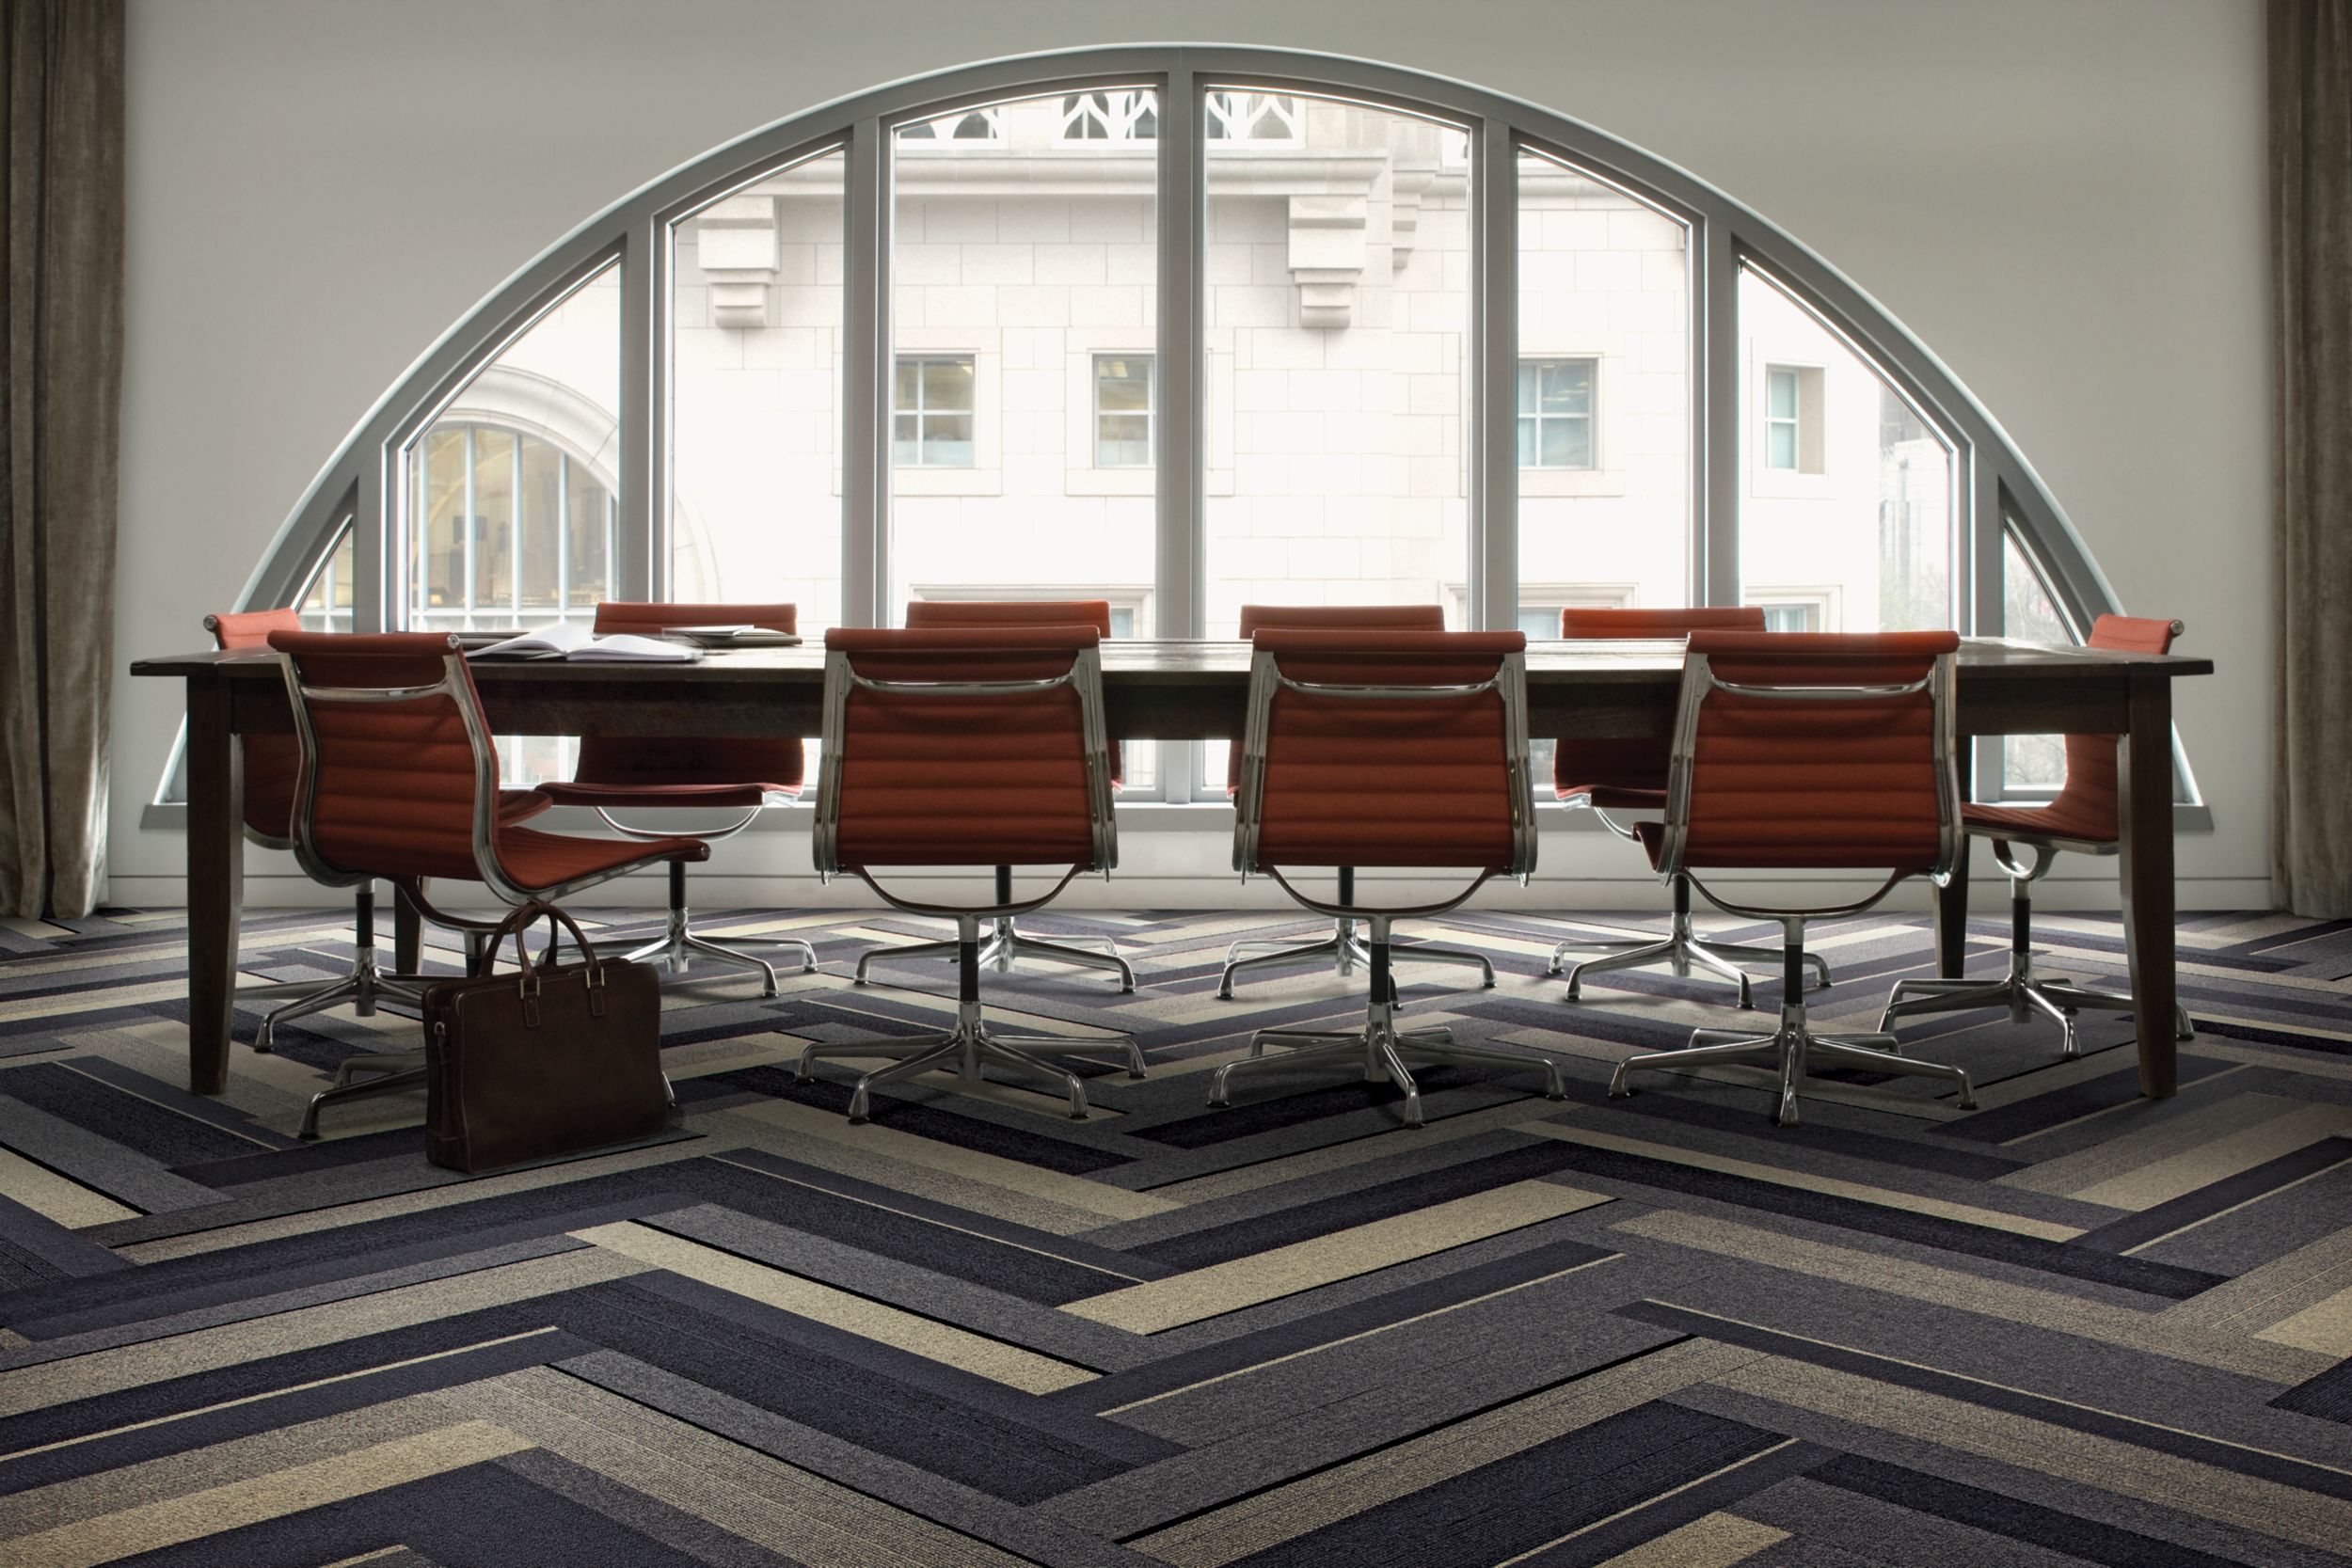 Interface PH210 plank carpet tile in naturally lighted meeting room with red chairs image number 8